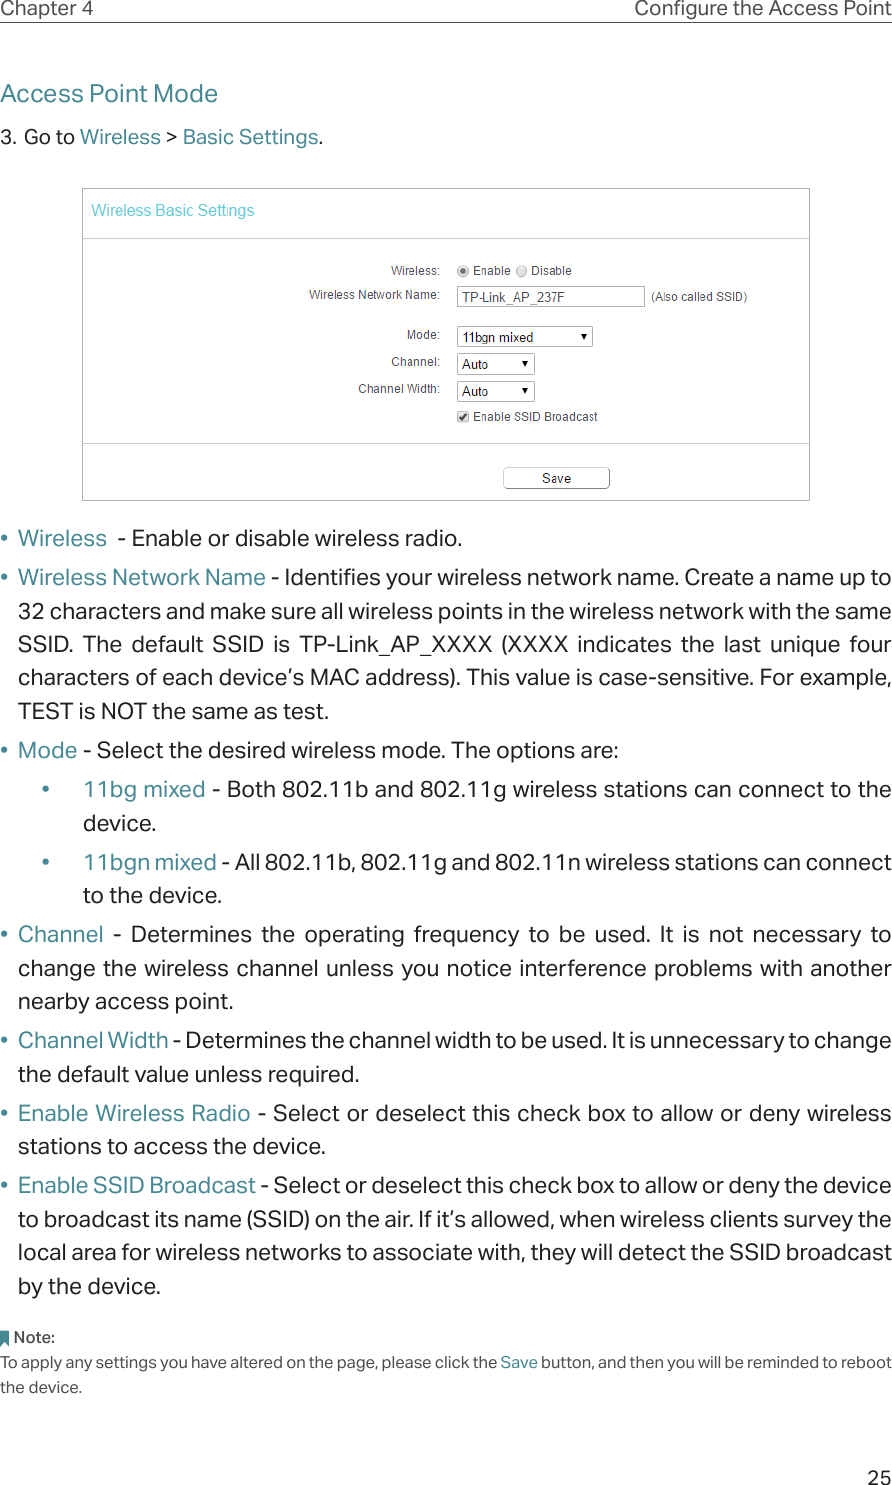 25Chapter 4 Congure the Access PointAccess Point Mode3. Go to Wireless &gt; Basic Settings.•  Wireless  - Enable or disable wireless radio.•  Wireless Network Name - Identifies your wireless network name. Create a name up to 32 characters and make sure all wireless points in the wireless network with the same SSID. The default SSID is TP-Link_AP_XXXX (XXXX indicates the last unique four characters of each device’s MAC address). This value is case-sensitive. For example, TEST is NOT the same as test.•  Mode - Select the desired wireless mode. The options are:•  11bg mixed - Both 802.11b and 802.11g wireless stations can connect to the device.•  11bgn mixed - All 802.11b, 802.11g and 802.11n wireless stations can connect to the device.•  Channel - Determines the operating frequency to be used. It is not necessary to change the wireless channel unless you notice interference problems with another nearby access point.•  Channel Width - Determines the channel width to be used. It is unnecessary to change the default value unless required.•  Enable Wireless Radio - Select or deselect this check box to allow or deny wireless stations to access the device. •  Enable SSID Broadcast - Select or deselect this check box to allow or deny the device to broadcast its name (SSID) on the air. If it’s allowed, when wireless clients survey the local area for wireless networks to associate with, they will detect the SSID broadcast by the device.  Note:To apply any settings you have altered on the page, please click the Save button, and then you will be reminded to reboot the device.